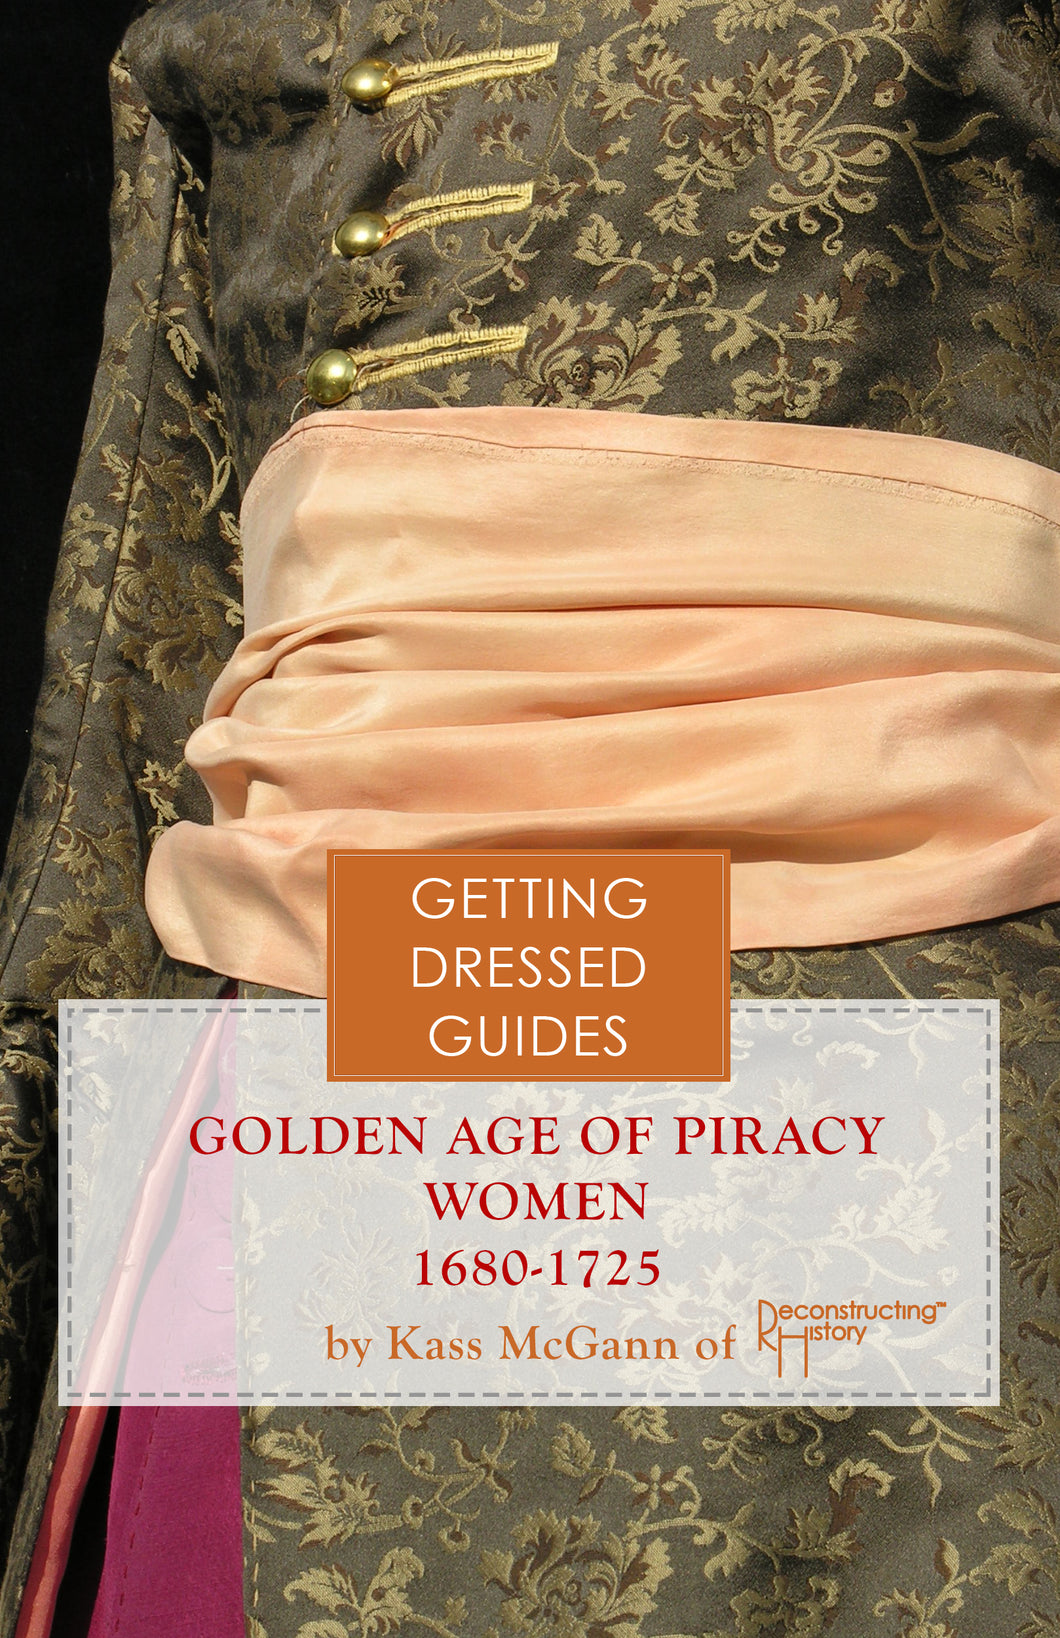 Golden Age of Piracy Women's Getting Dressed Guide